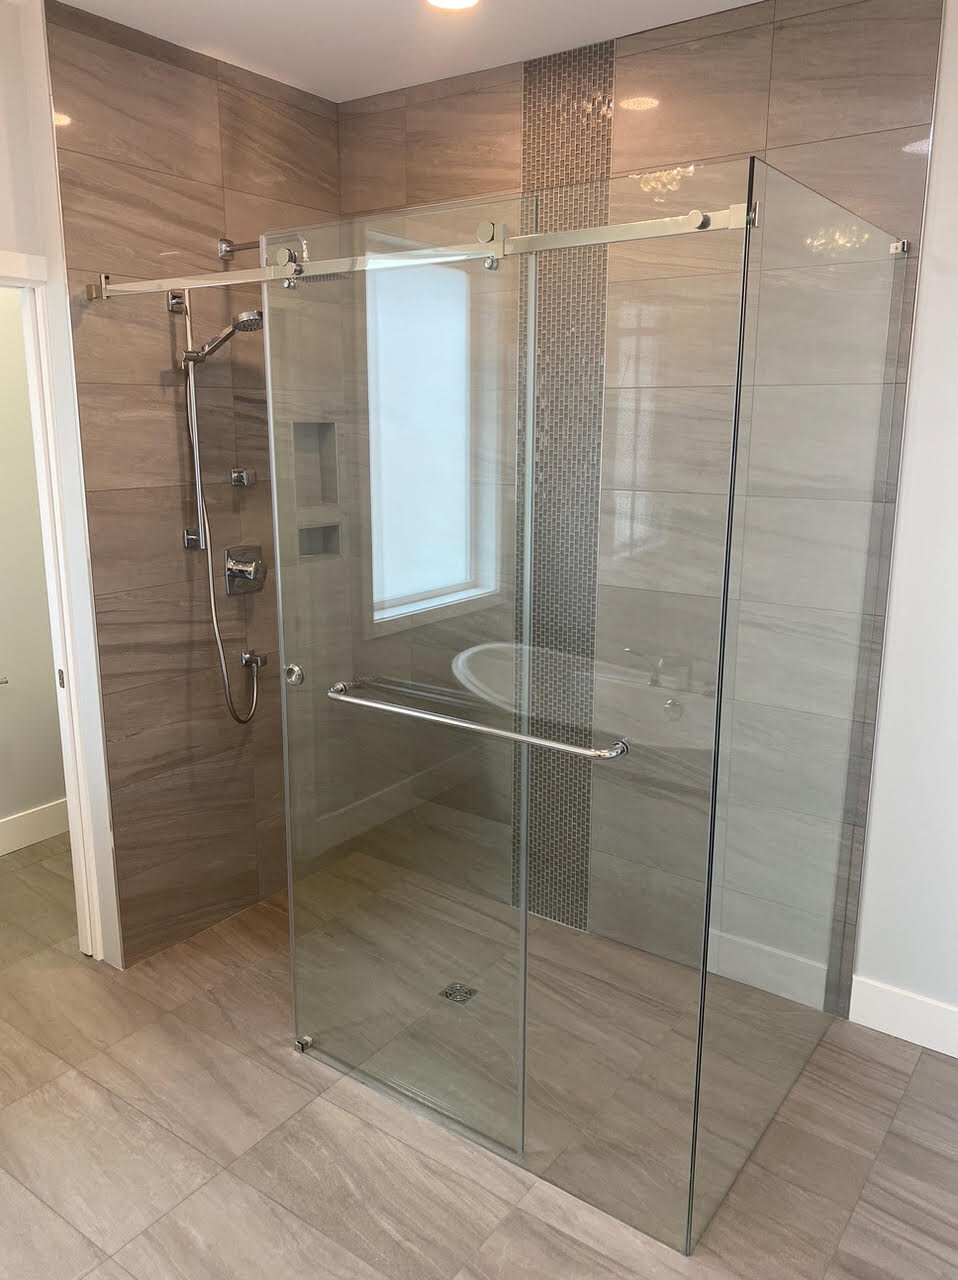 Ensuite shower design with accent tile, glass surround, and chrome fixtures by K2 Developments.